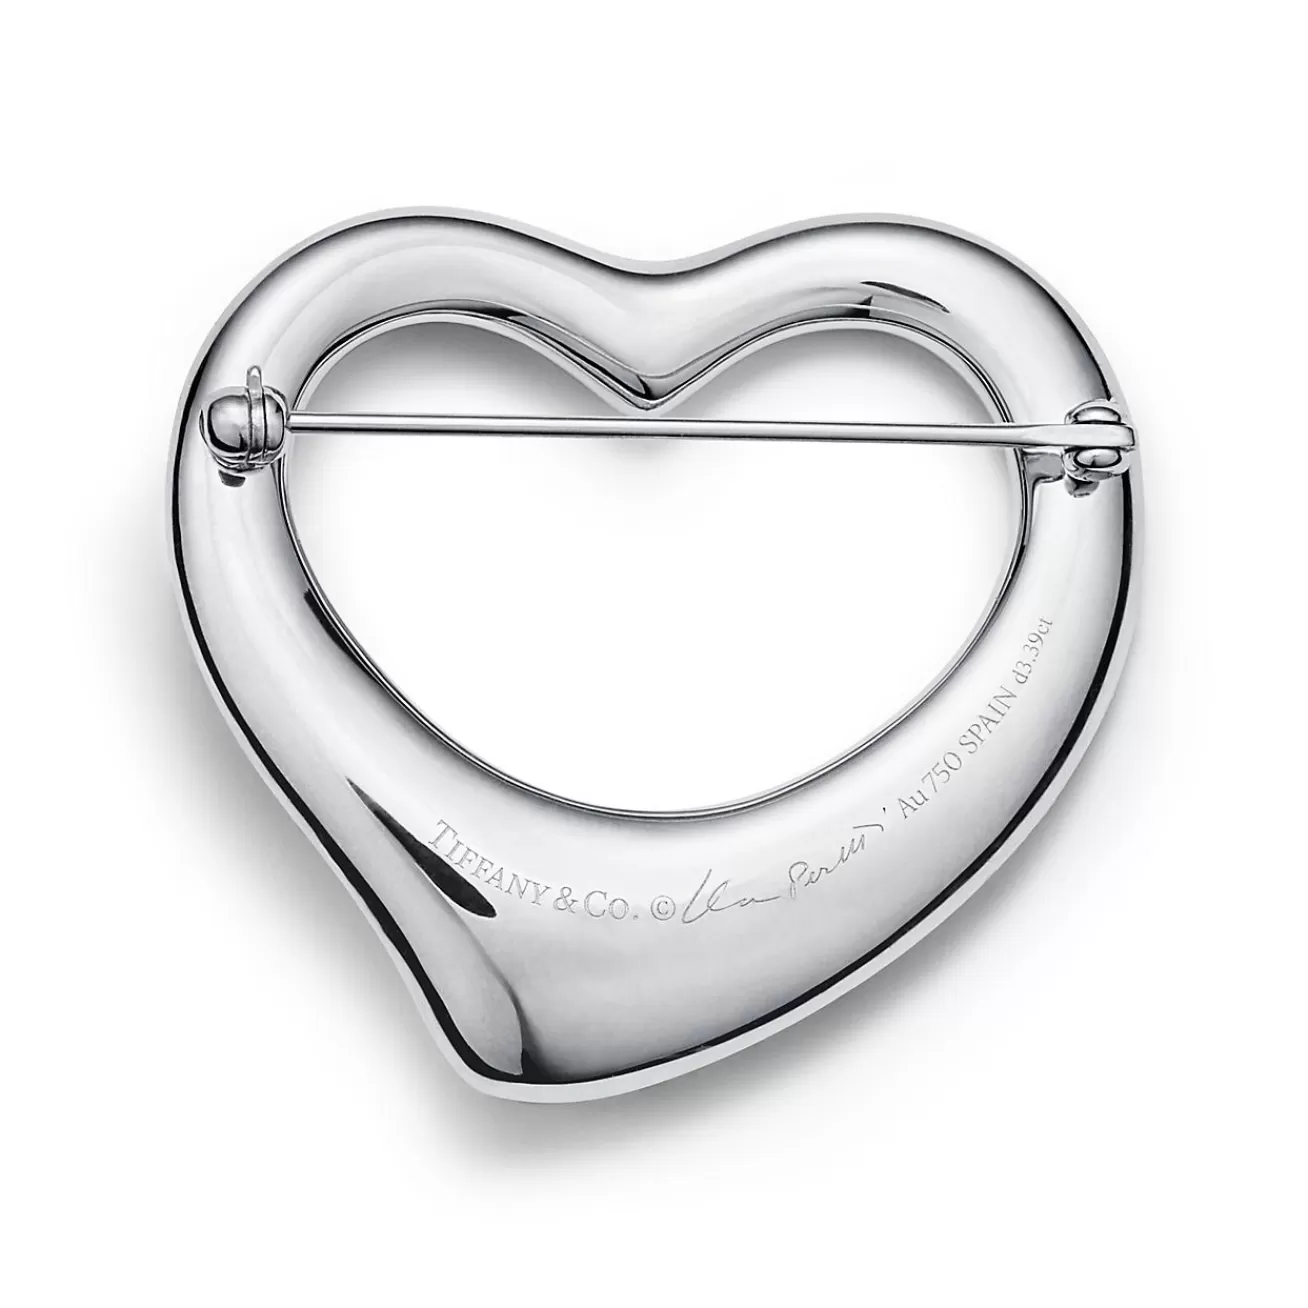 Tiffany & Co. Elsa Peretti® Open Heart Brooch in Platinum with Pavé Diamonds | ^ Brooches | Platinum Jewelry